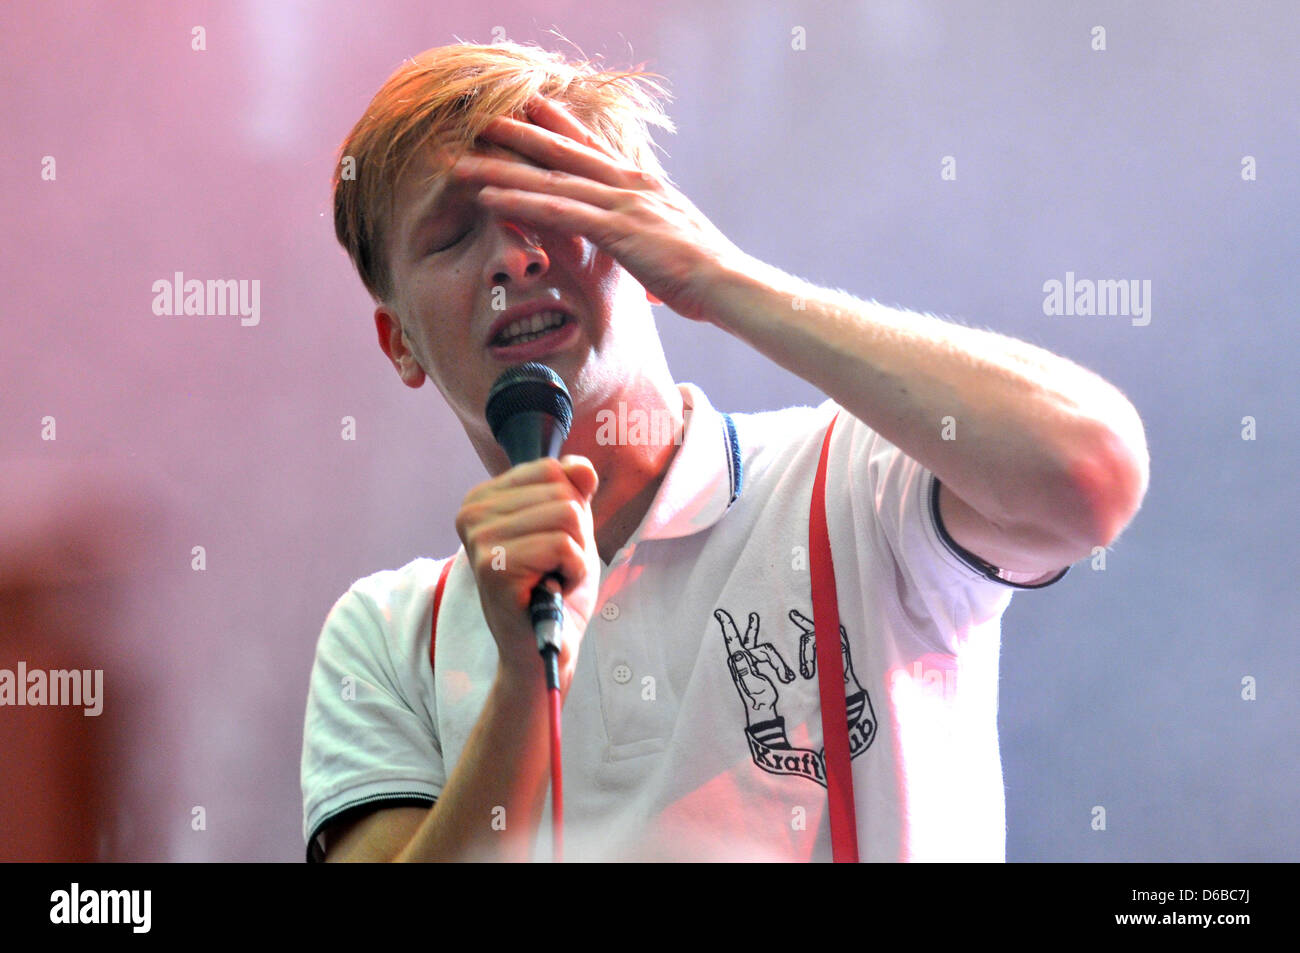 Felix Brummer (Felix Kummer) of the German band Kraftklub perfroms on stage at the Veltins-Arena in Gelsenkirchen, Germany, 25 August 2012. Tens of thousands of people attended the one-day festival 'Rock im Pott'. Photo: Jan Knoff Stock Photo